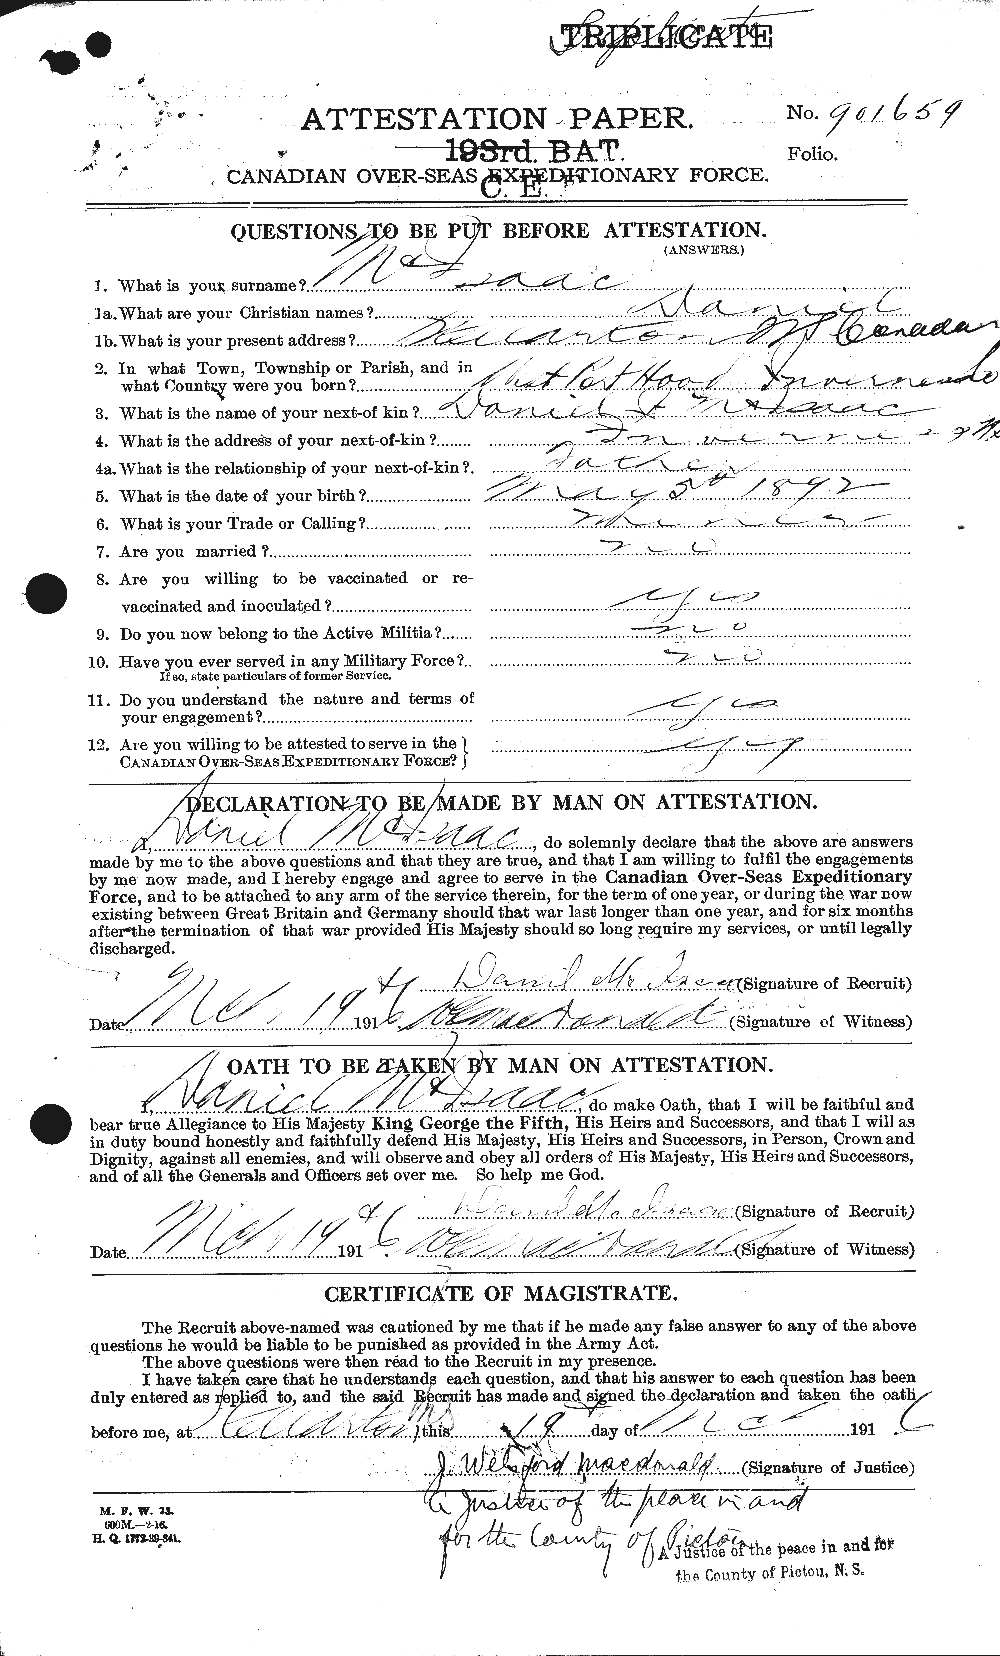 Personnel Records of the First World War - CEF 527707a